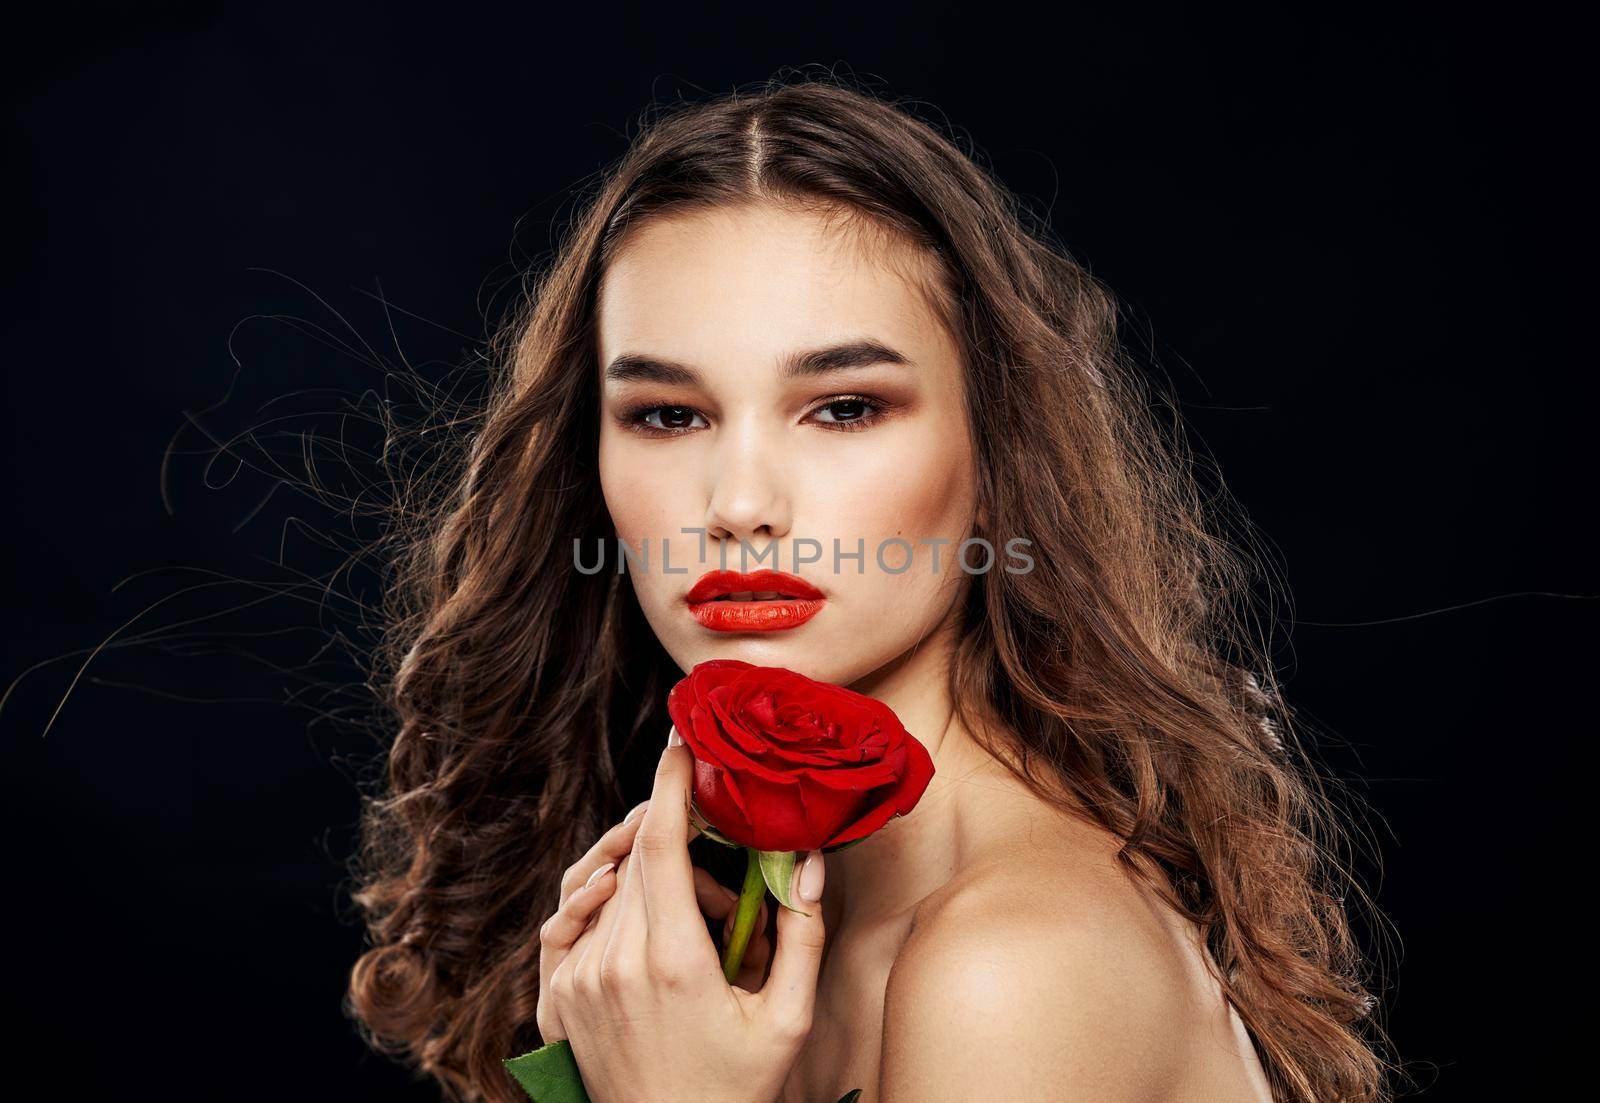 Brunette woman with a red rose in her hand on a dark background close-up. High quality photo